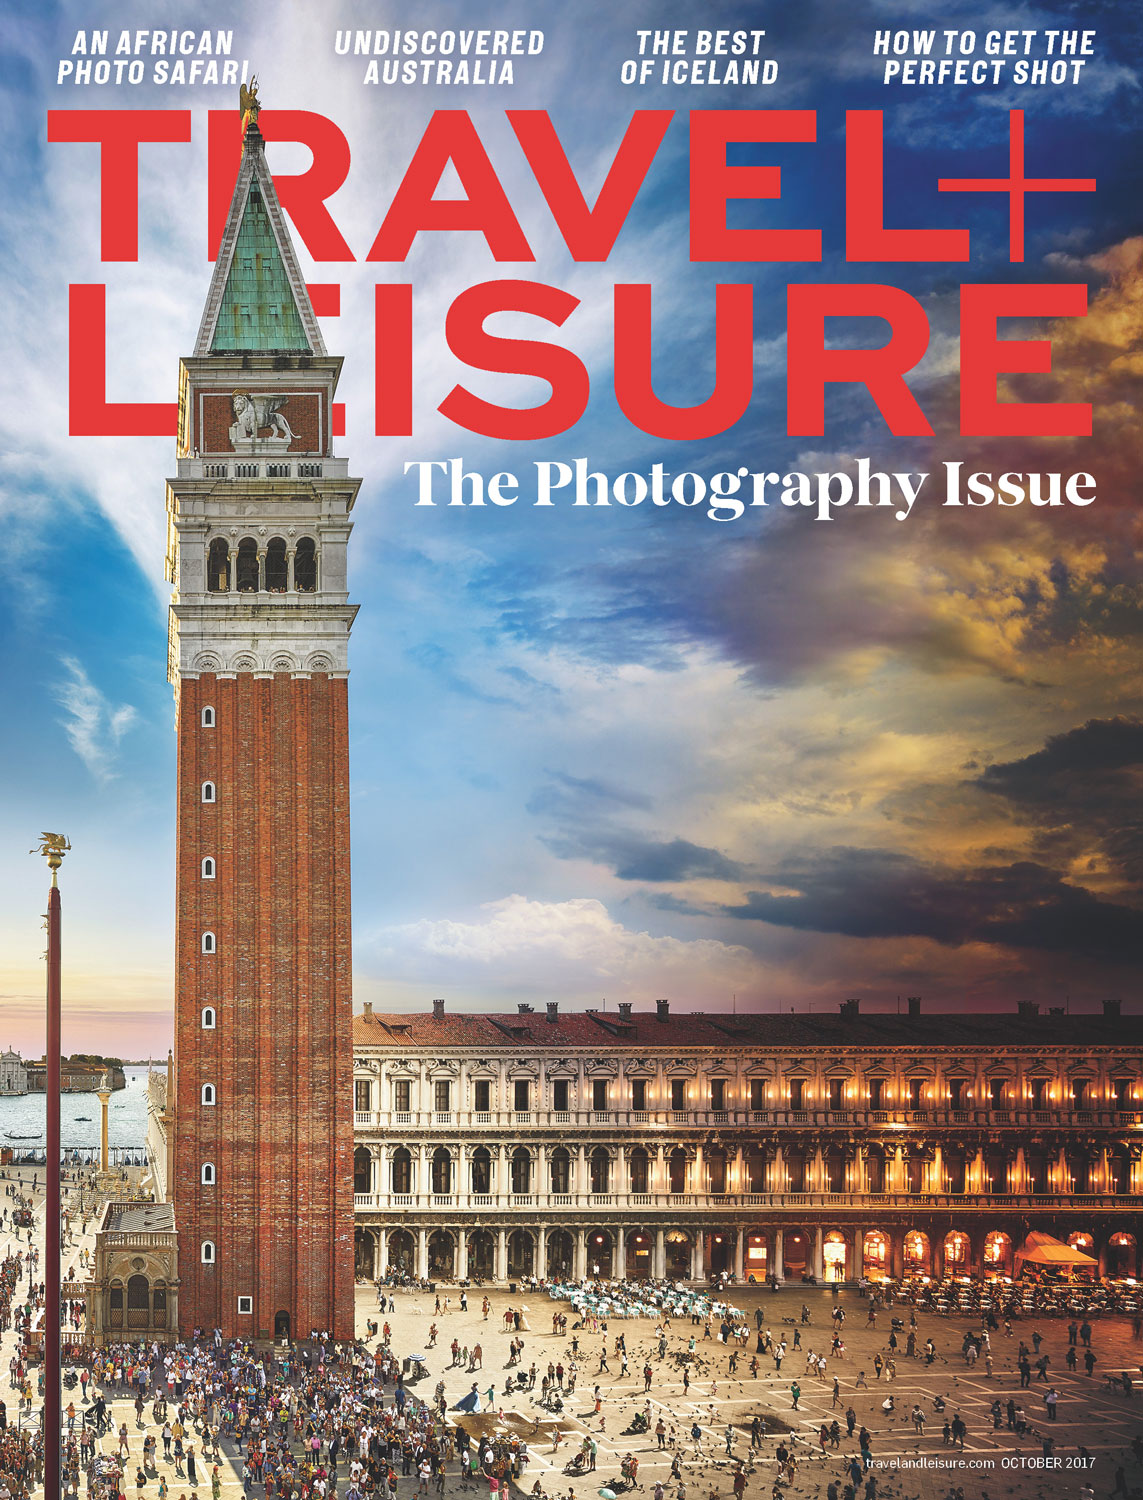 Travel and Leisure Magazine Stephen Wilkes Photography